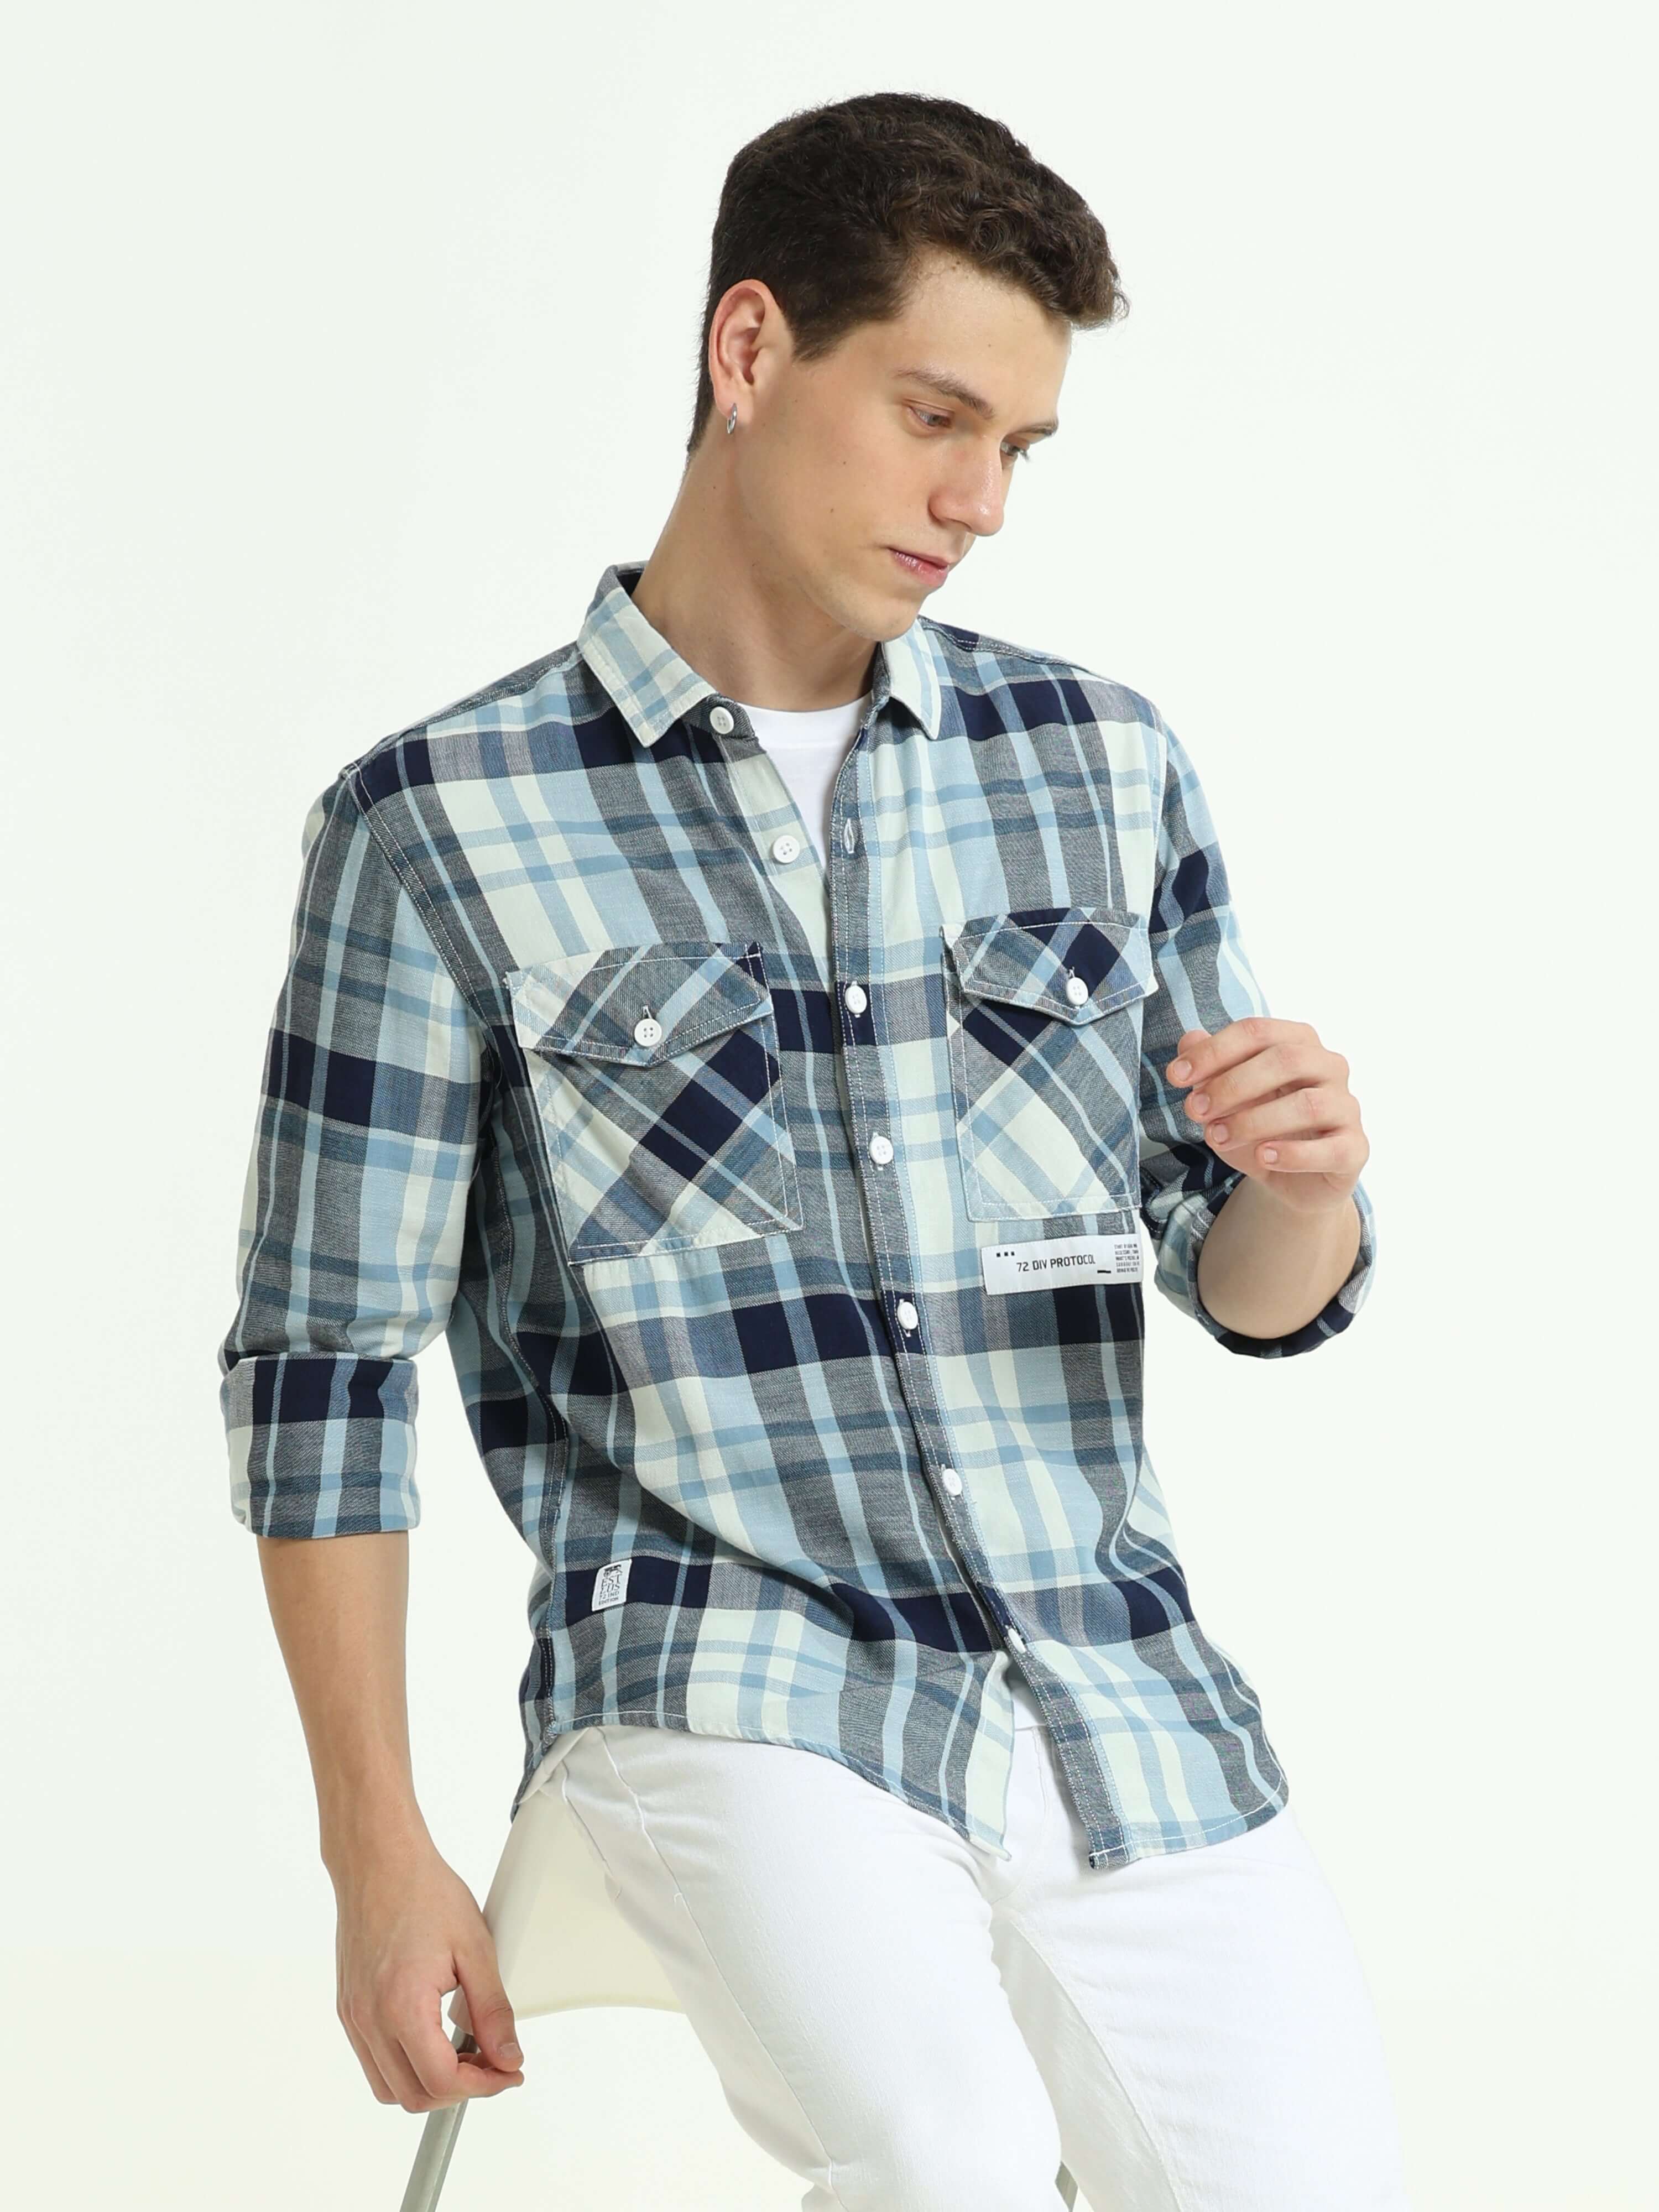 Indigo check double pocket shirt shop online at Estilocus. 100% Cotton • Full-sleeve check shirt• Cut and sew placket• Regular collar• Double button edge cuff• Double pocket with flap• Curved bottom hemline .• All double needle construction, finest qualit